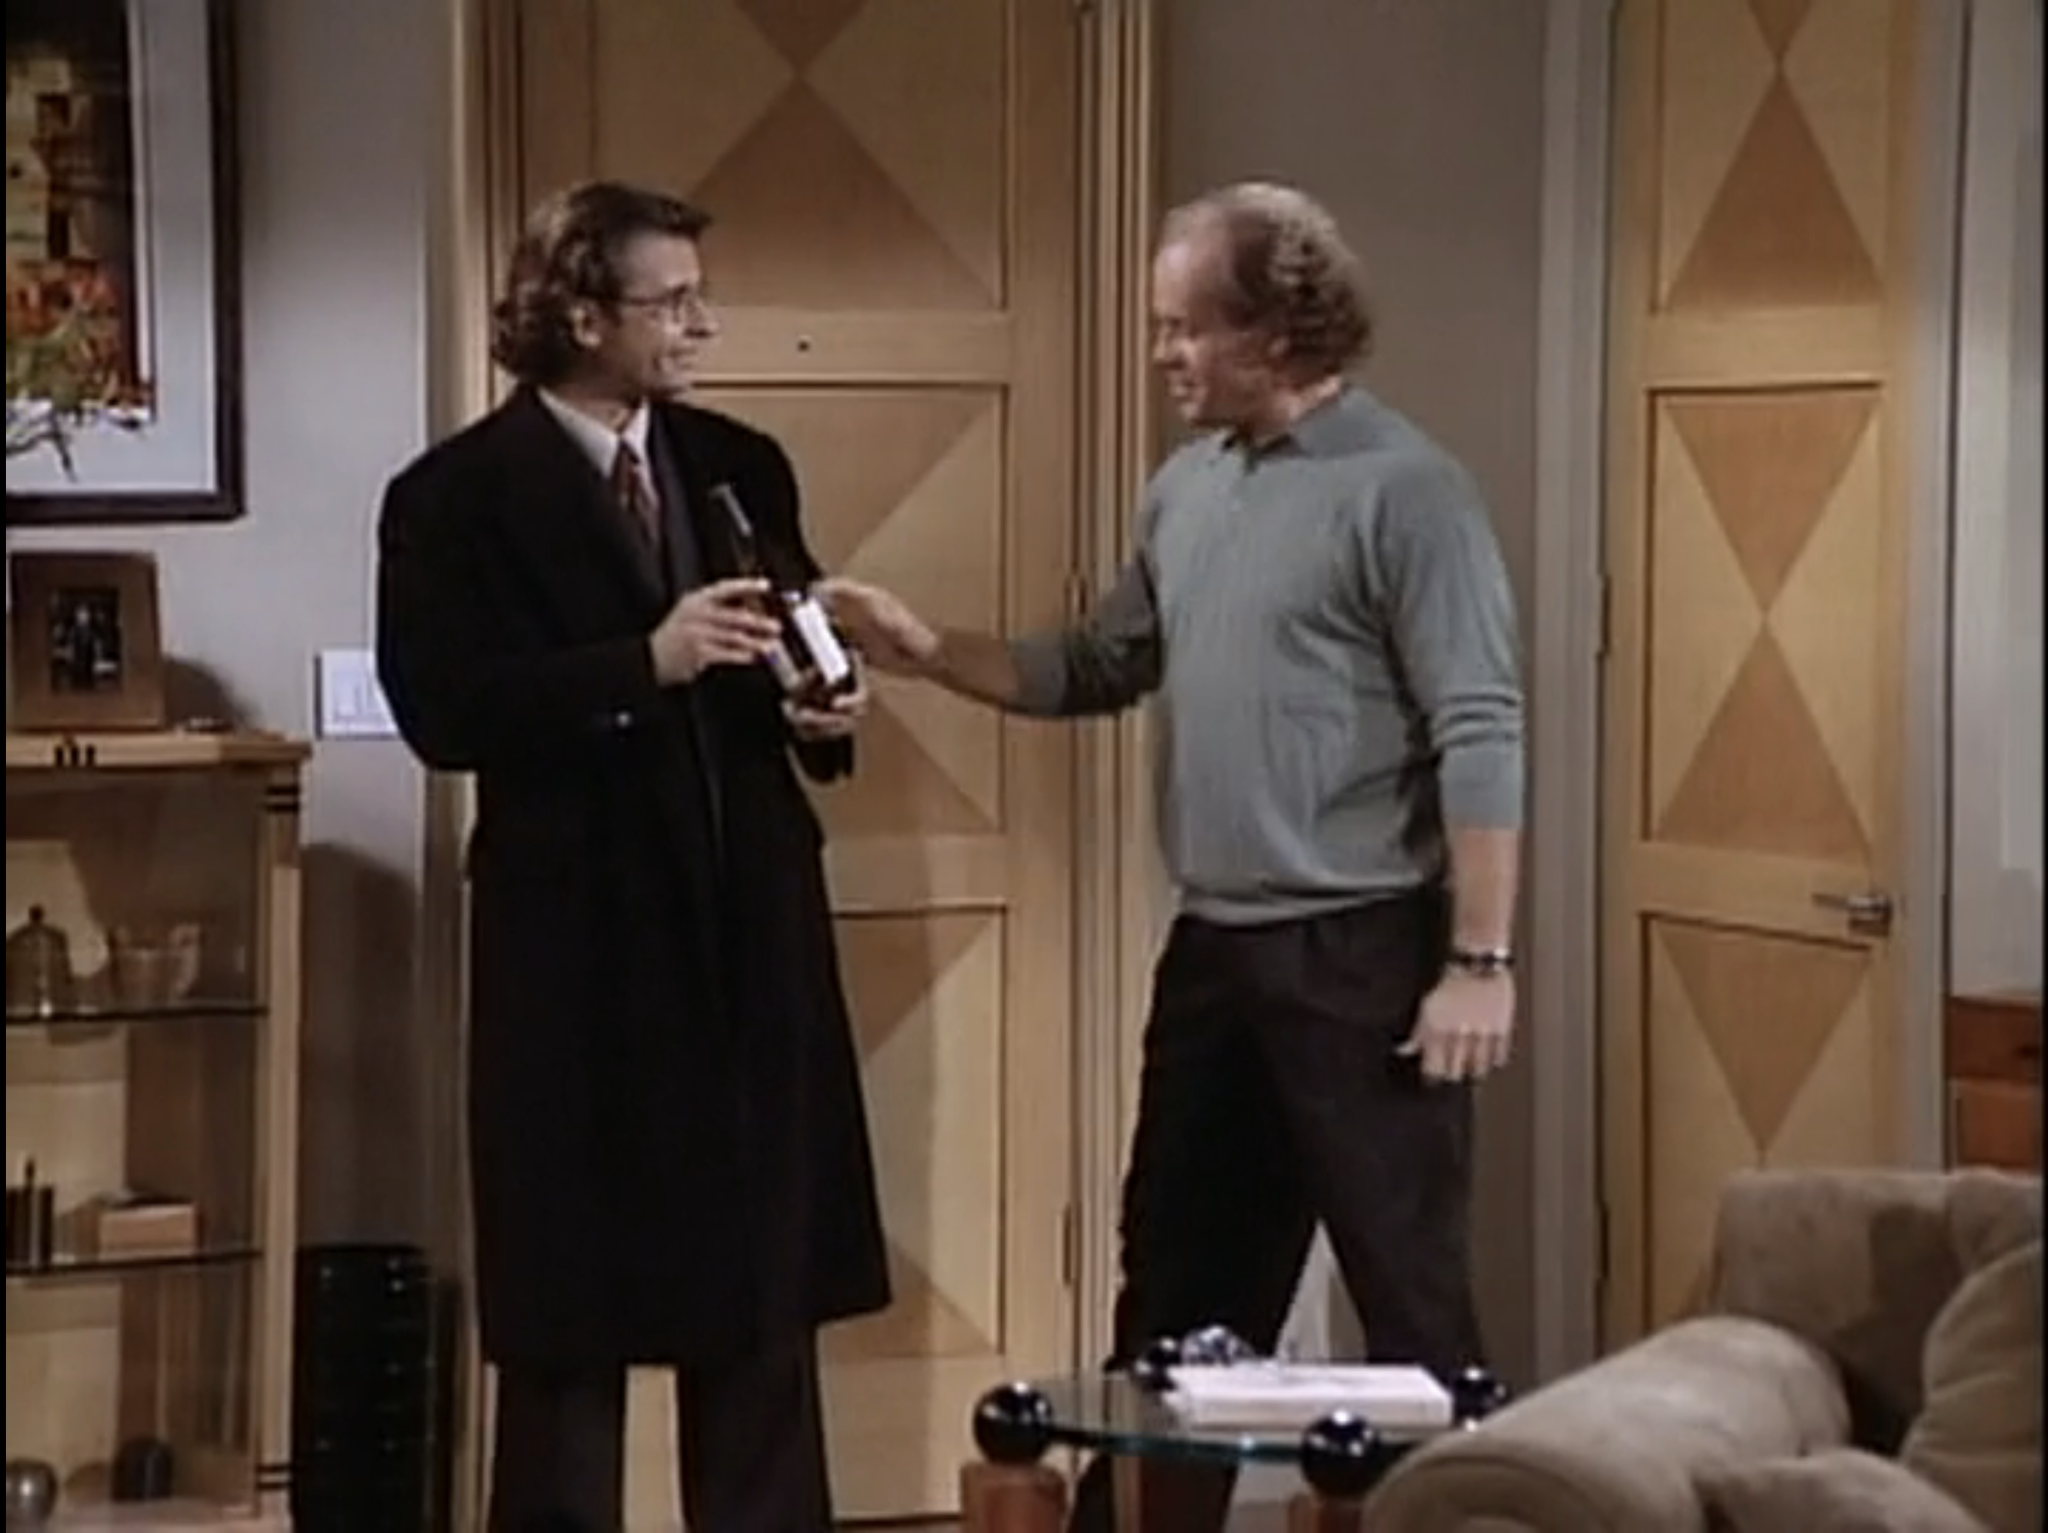 The Gay Sensibility of ‘Frasier’ Was Ahead of Its Time